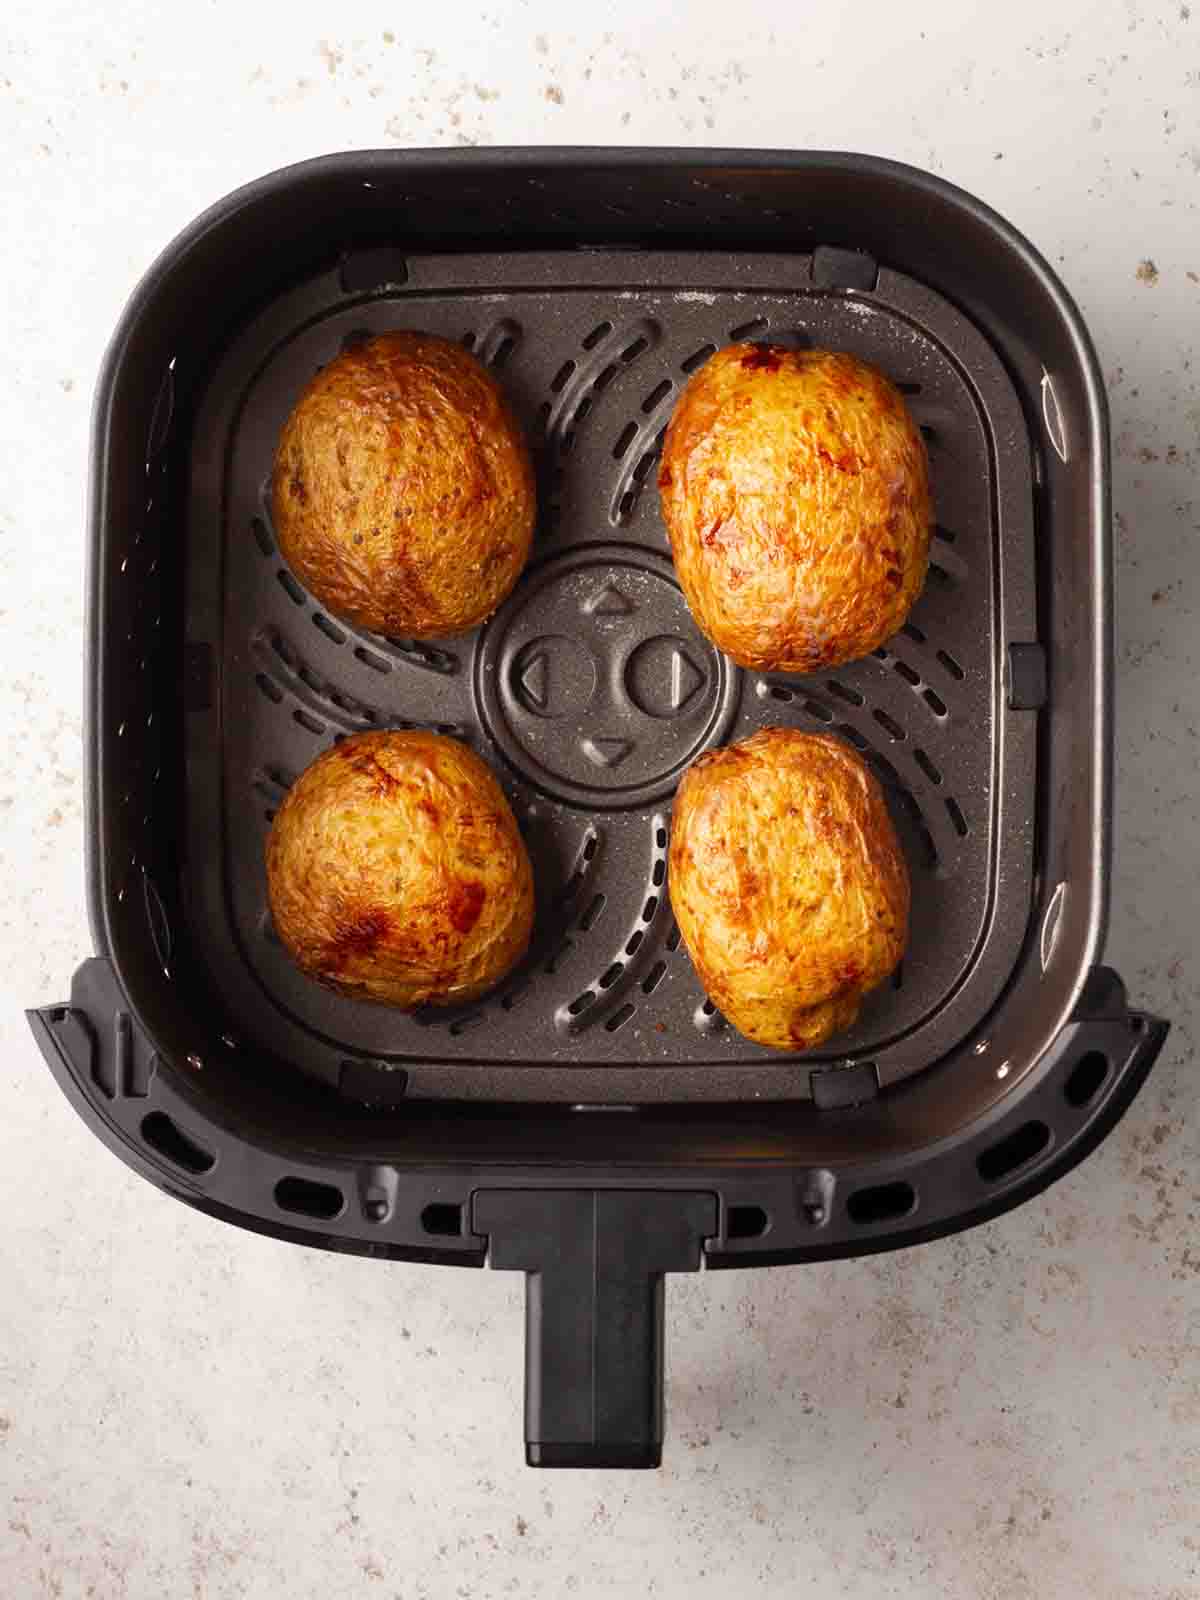 An air fryer with four cooked baked potatoes in side.